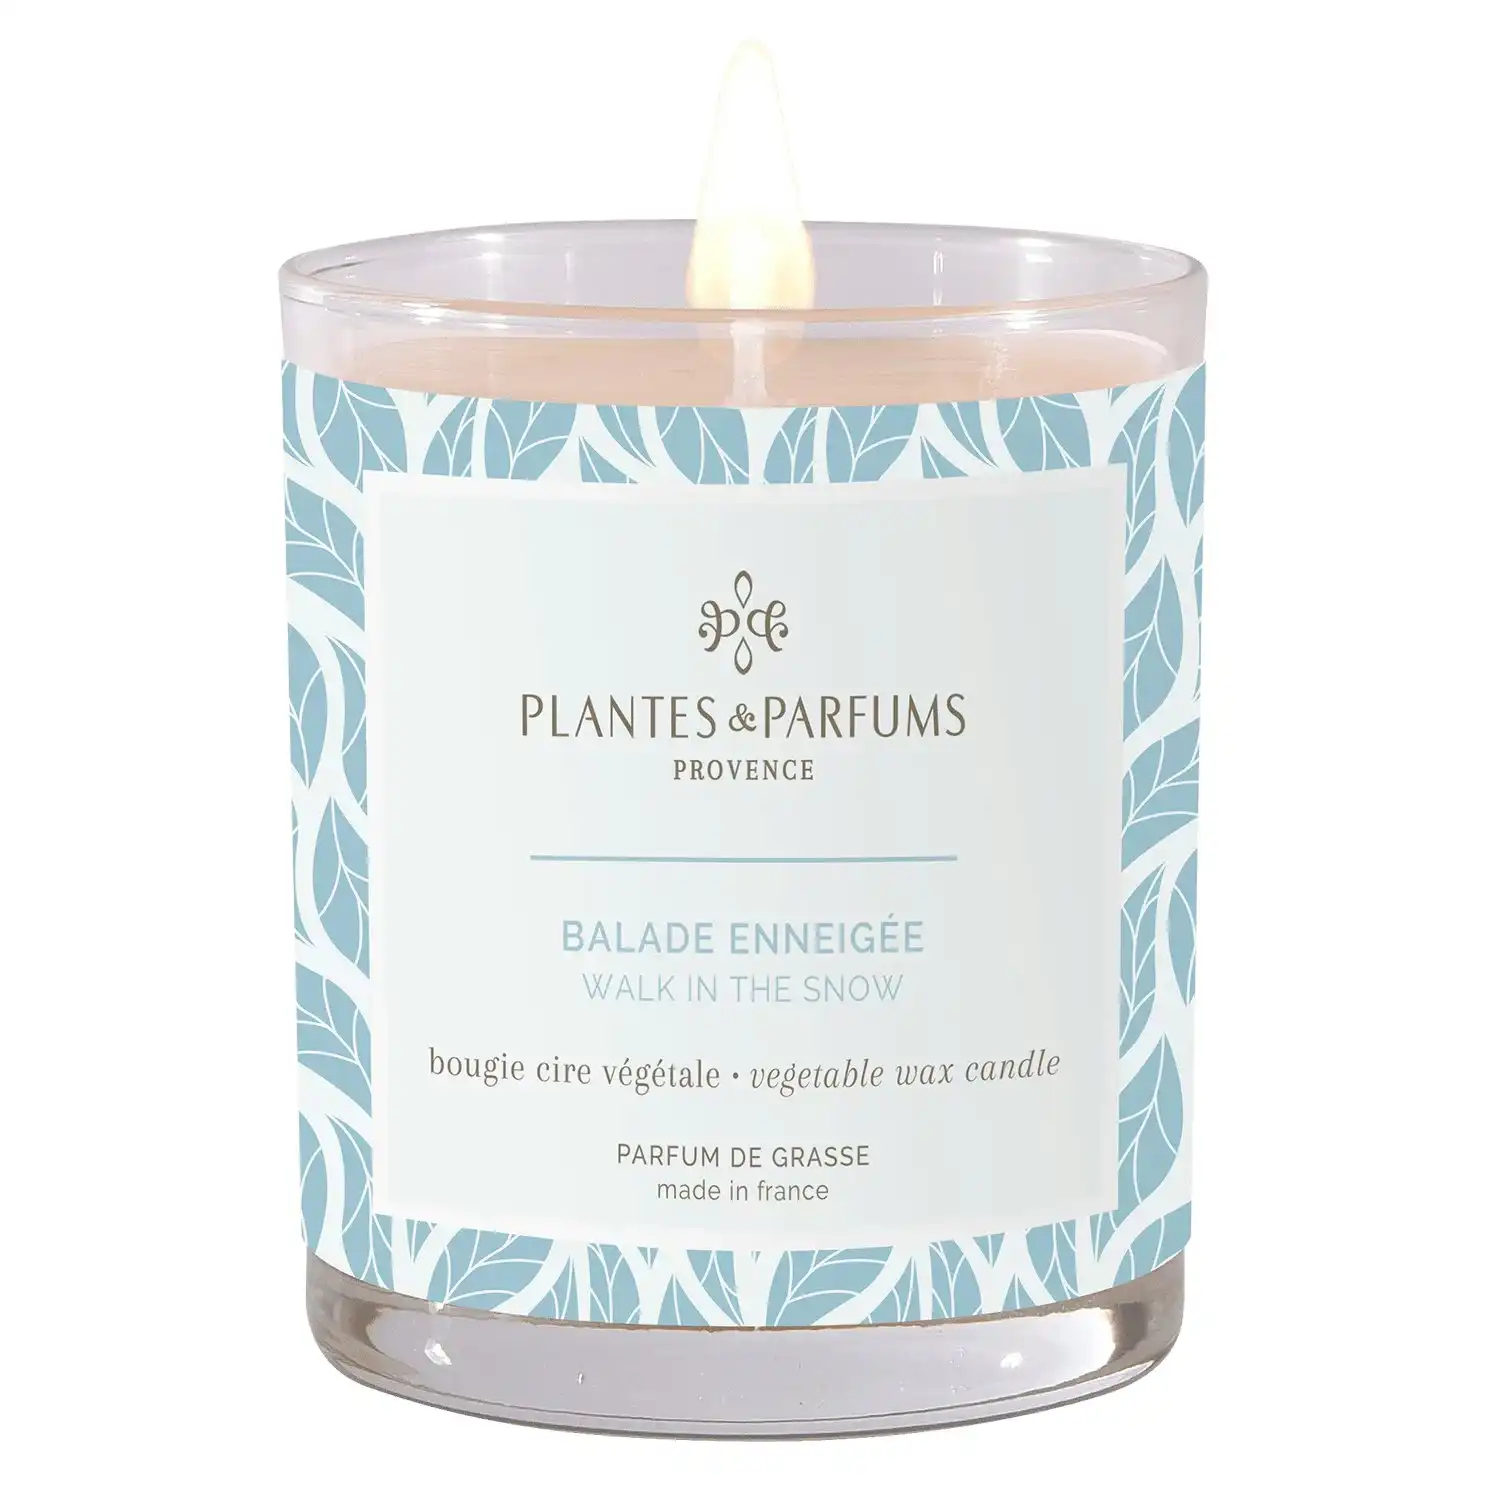 Plantes & Parfums | 180g Handcrafted Perfumed Candle - Walk in the Snow